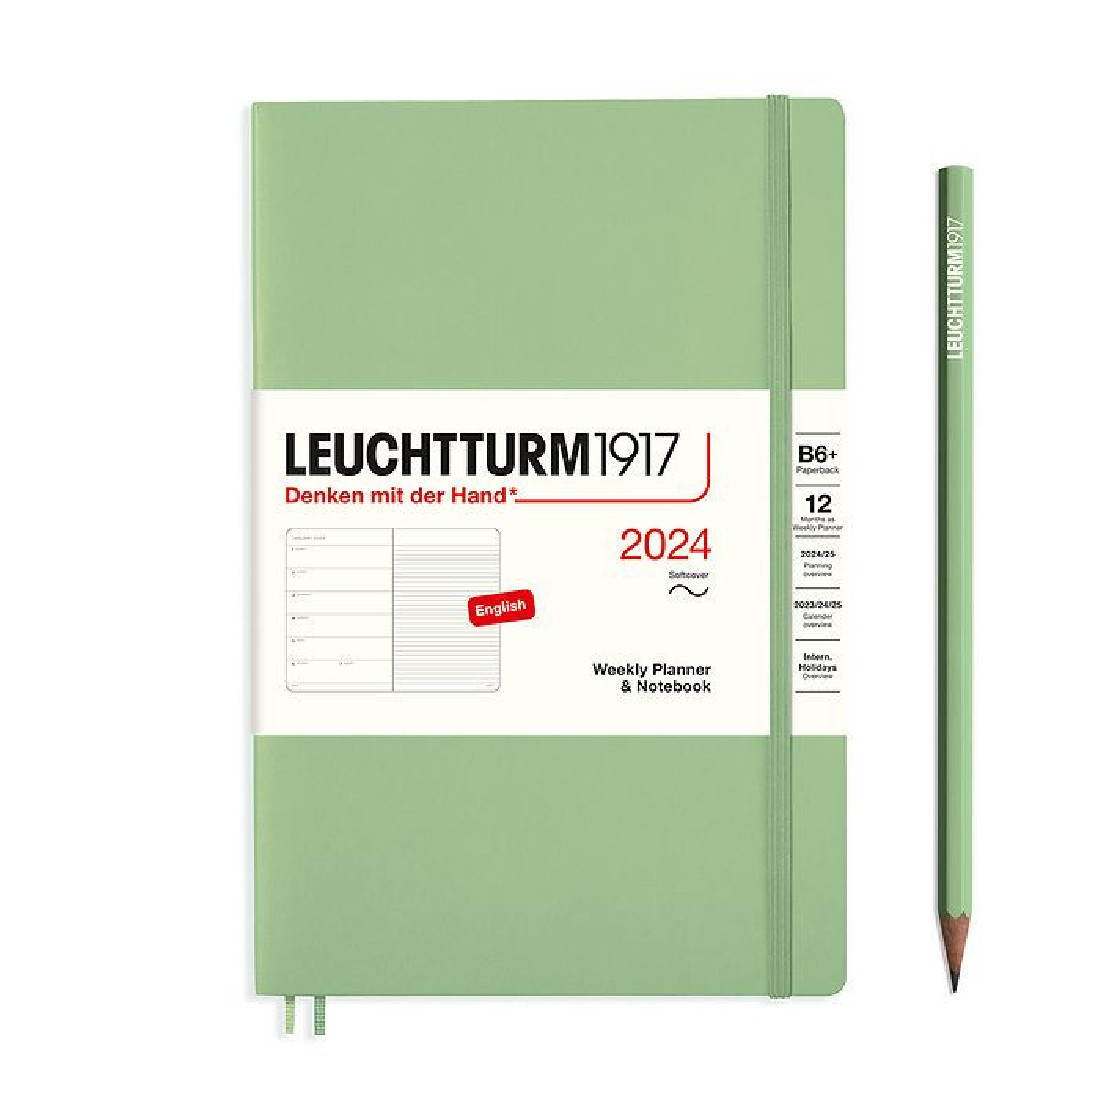 Leuchtturm 1917 Monthly Planner and Notebook 2024 Black Composition B5 Soft  Cover